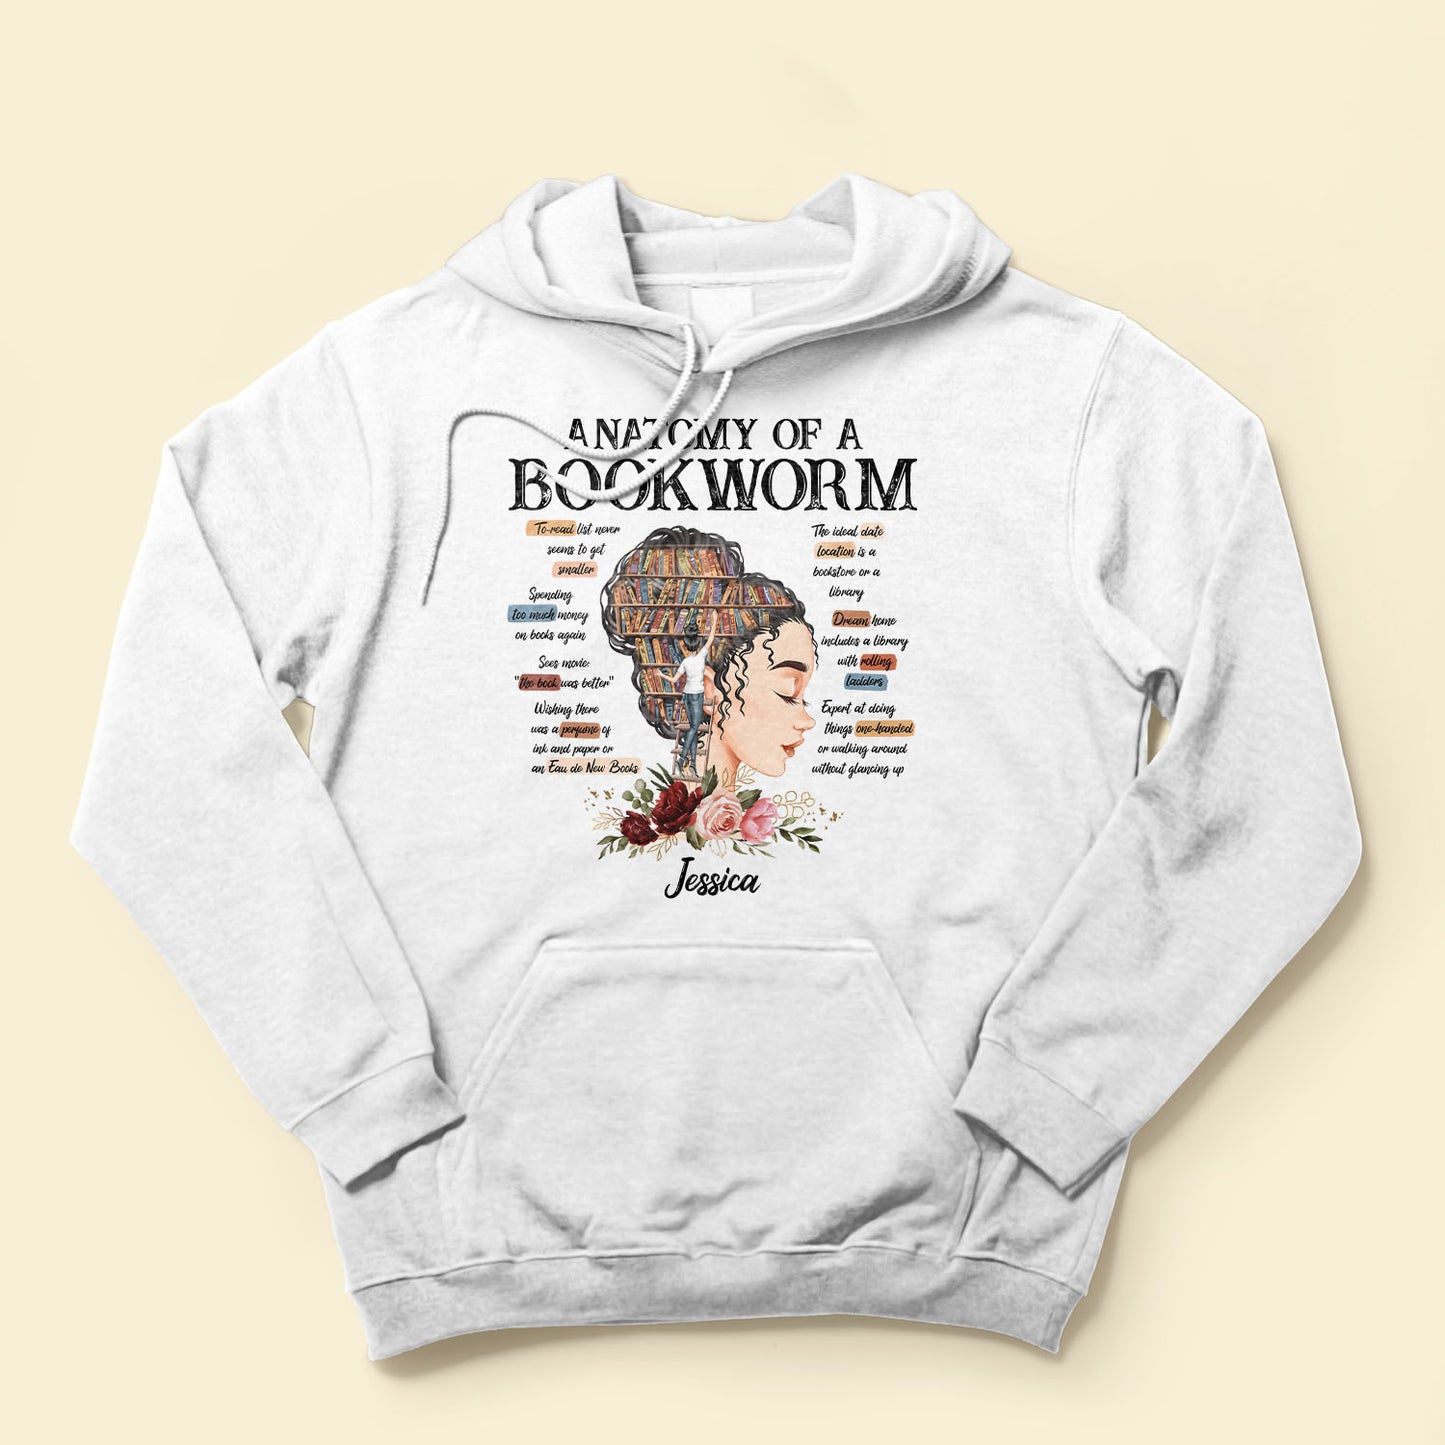 Anatomy Of A Bookworm - Personalized Shirt - Birthday, Funny Gift For Bookworn, Book Lovers, Reading Lovers